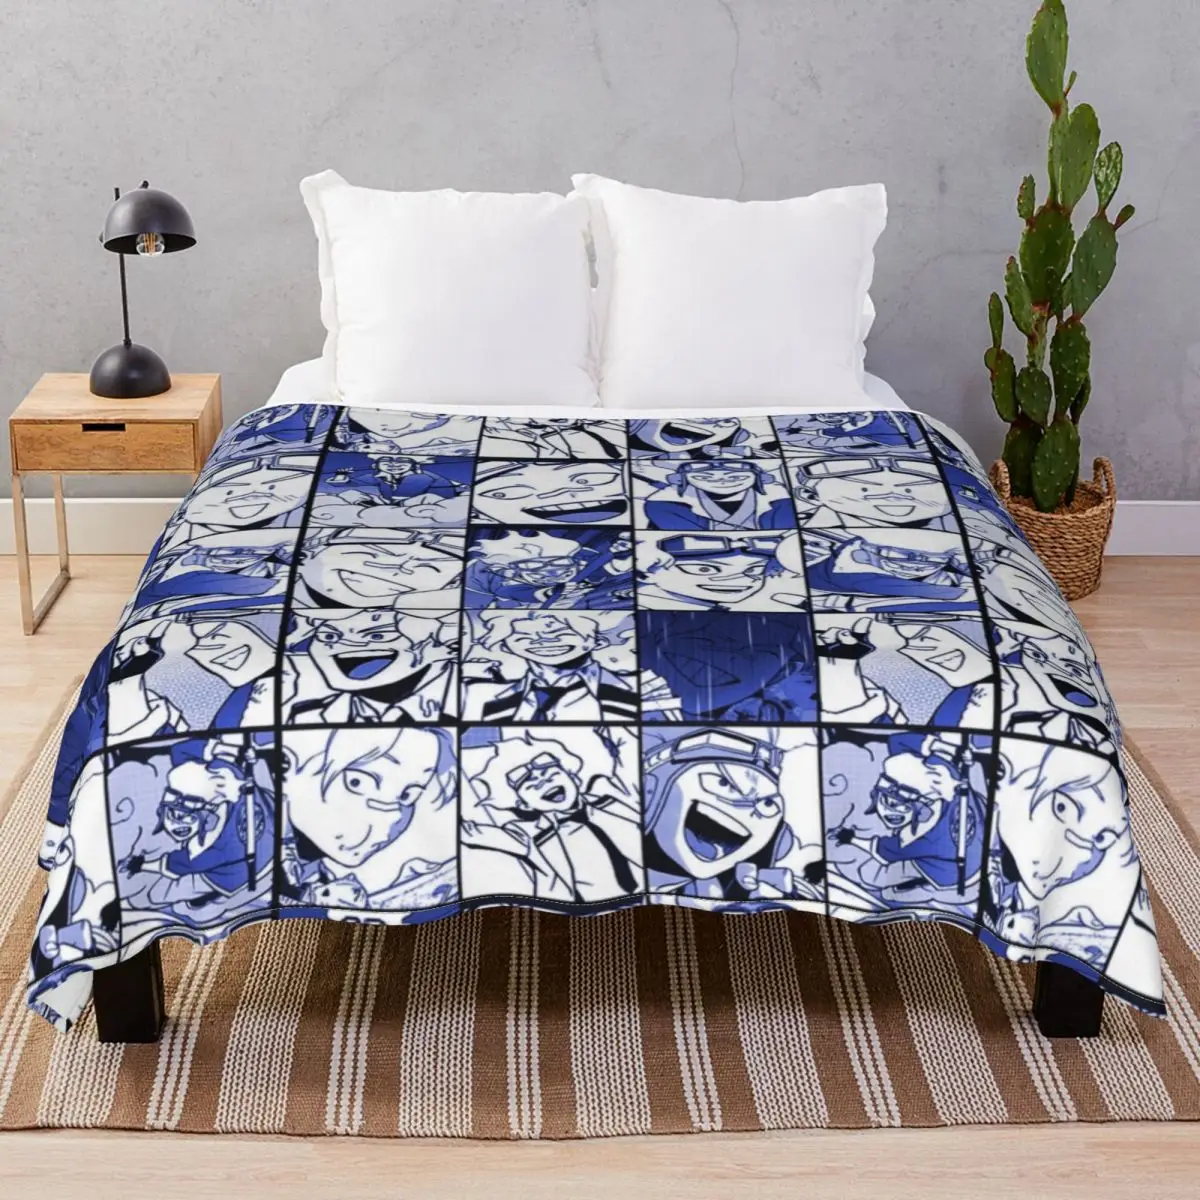 Oboro Shirakumo Collage Blanket Flannel Plush Print Fluffy Throw Blankets for Bed Sofa Camp Office